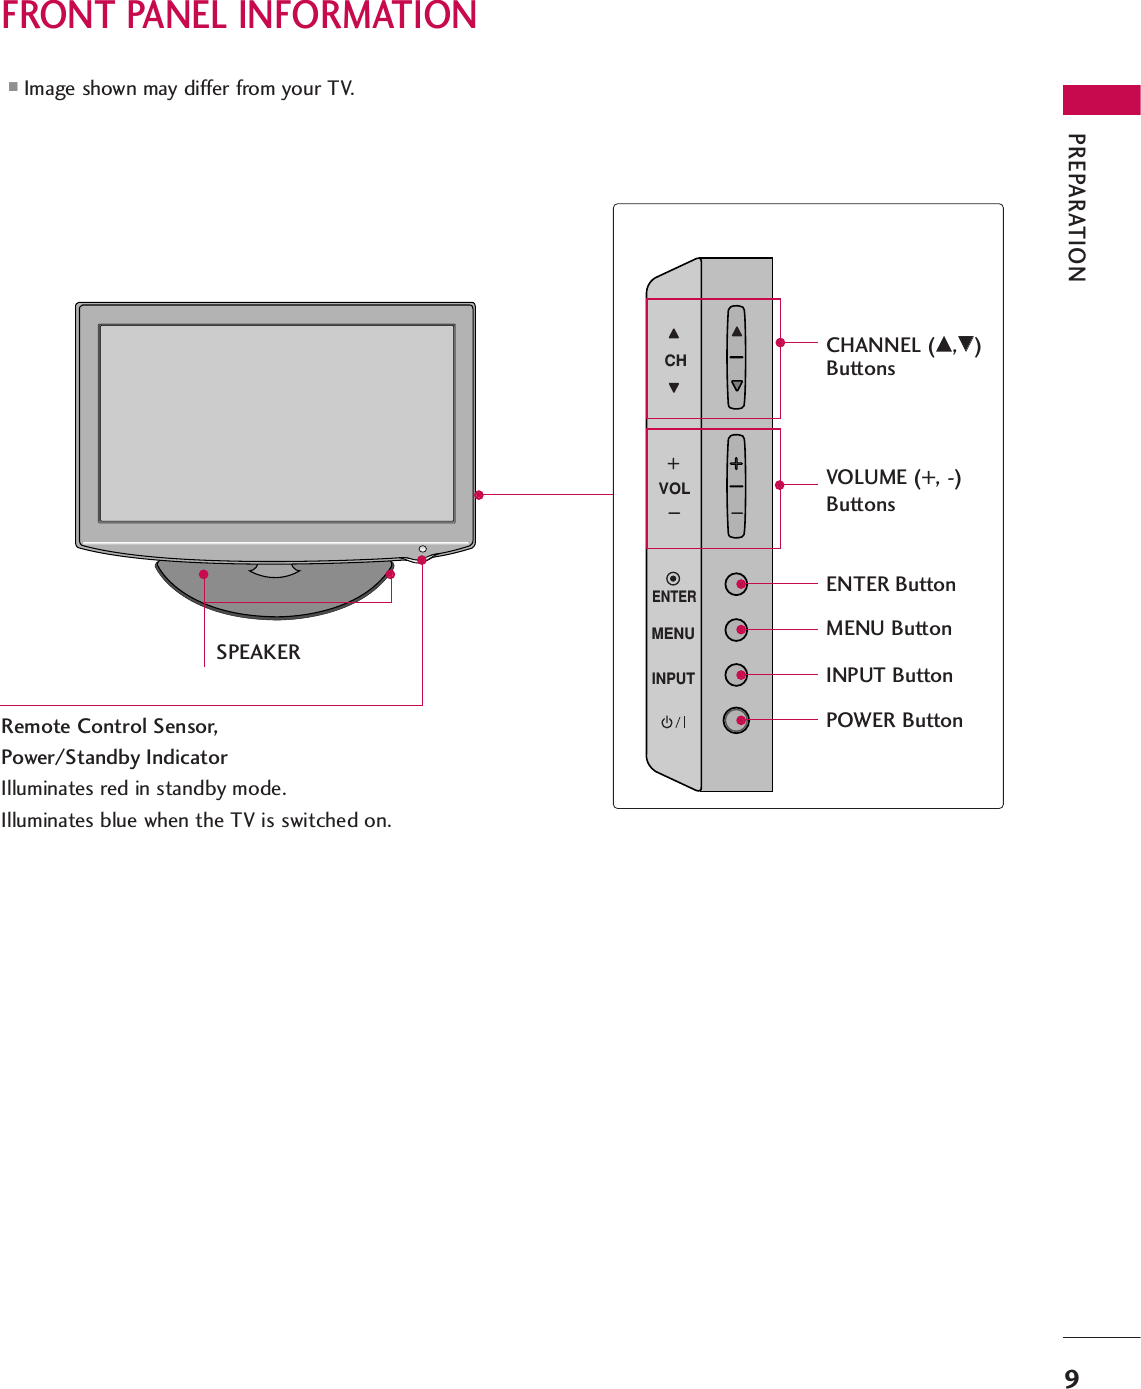 PREPARATION9FRONT PANEL INFORMATION■Image shown may differ from your TV.INPUTMENUENTERCHVOLCHANNEL (DD,EE)ButtonsVOLUME (+, -) ButtonsENTER ButtonMENU ButtonINPUT ButtonPOWER ButtonSPEAKERRemote Control Sensor,Power/Standby IndicatorIlluminates red in standby mode.Illuminates blue when the TV is switched on.